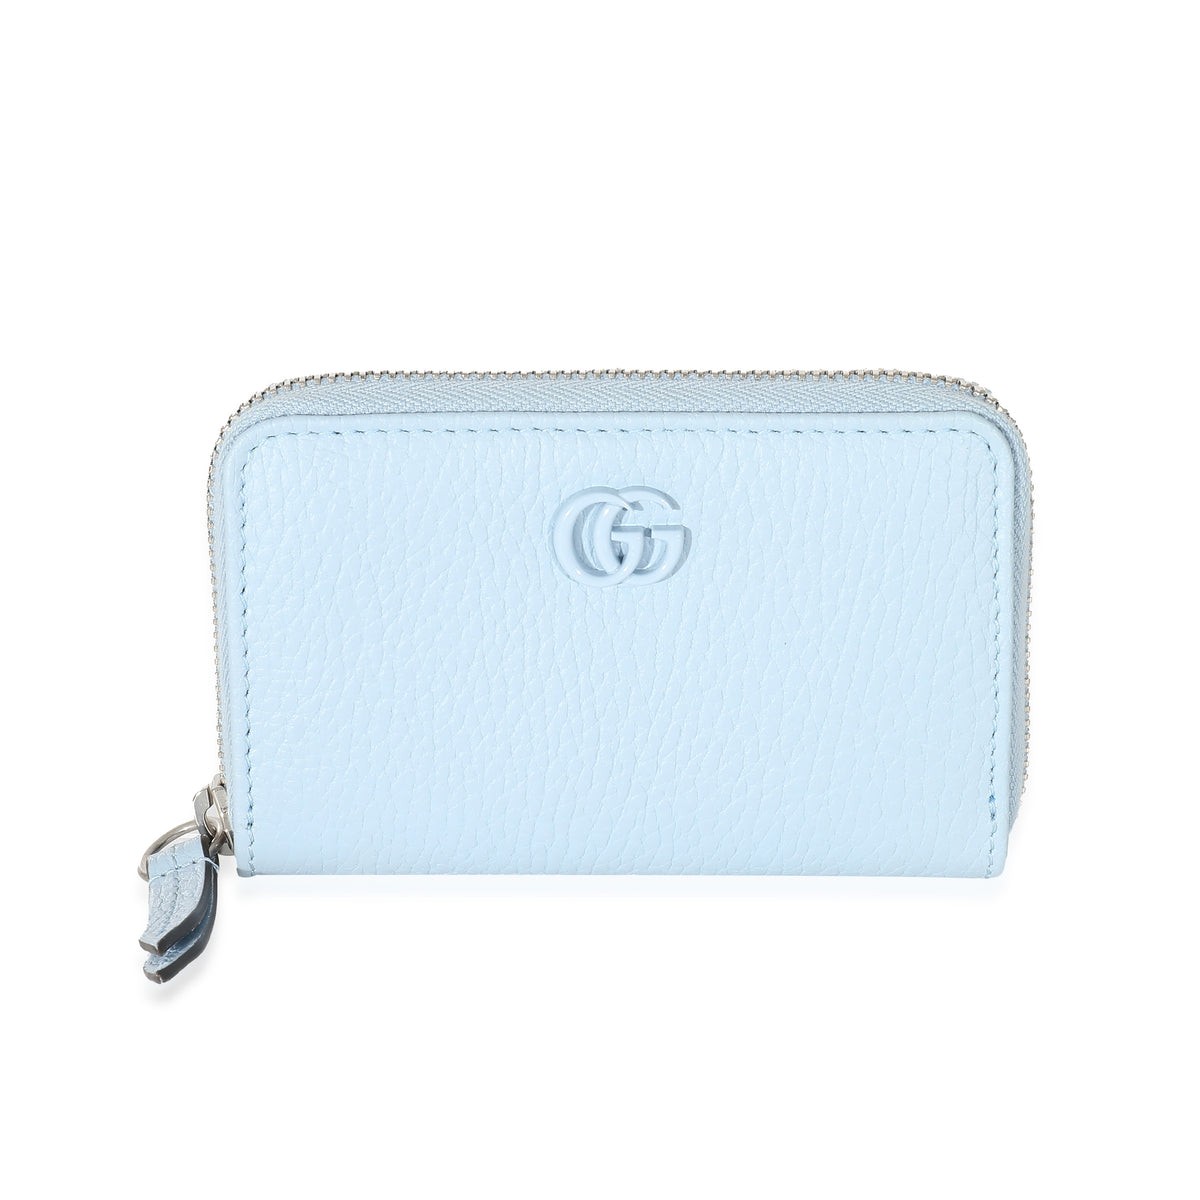 Gucci Marmont Zip Around Shoulder Bag GG Small Pastel Blue in